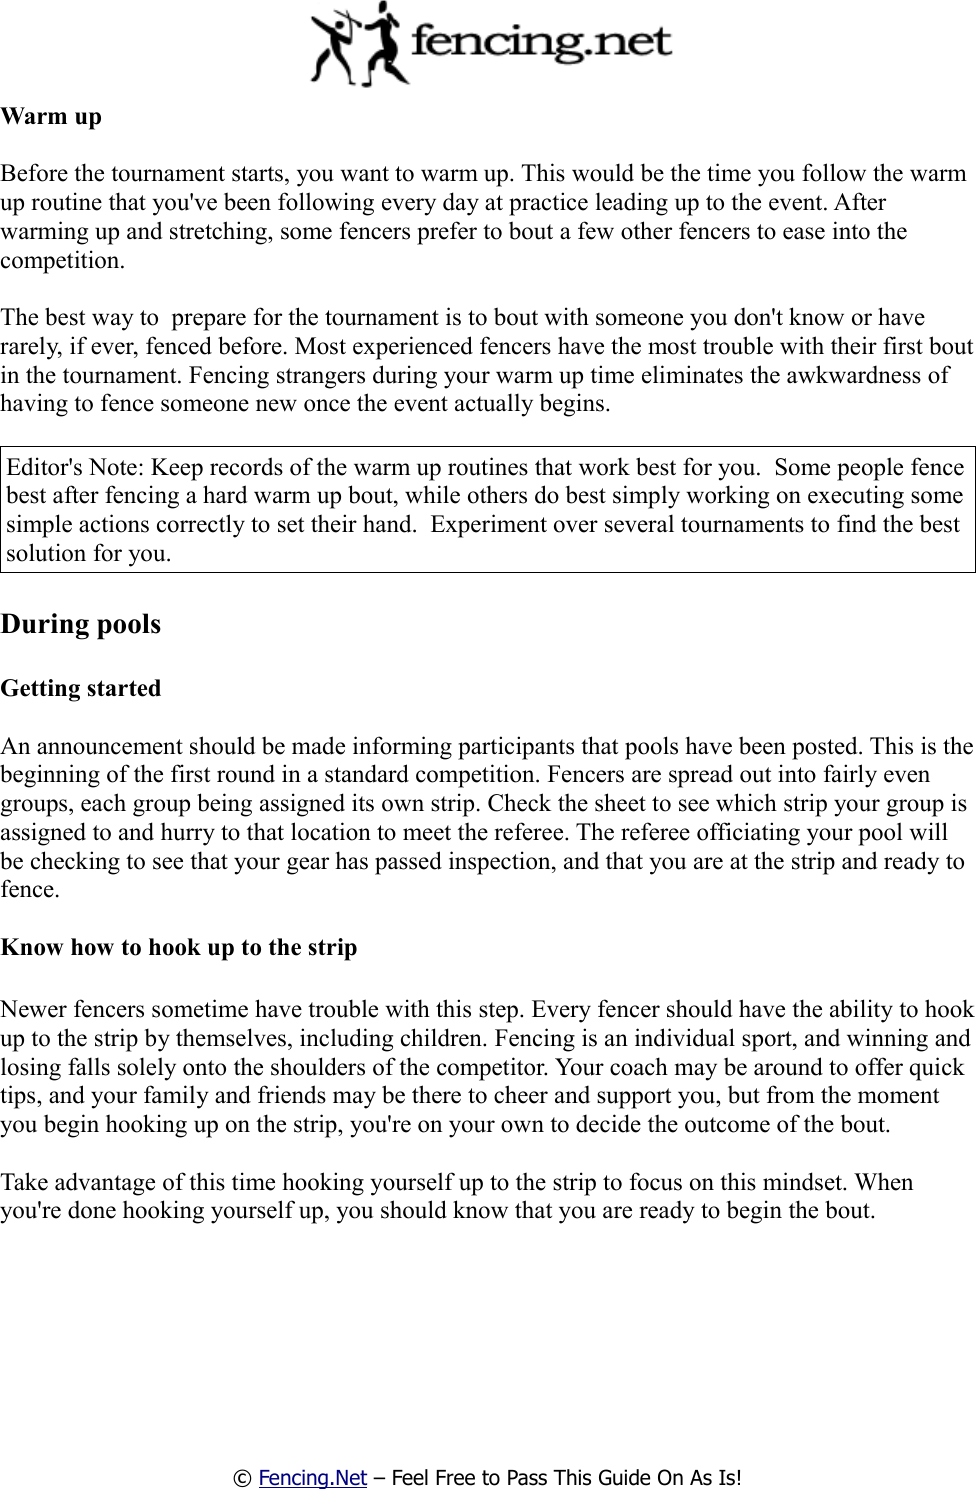 Page 5 of 10 - A Beginner's Guide To Their First Fencing Tournament